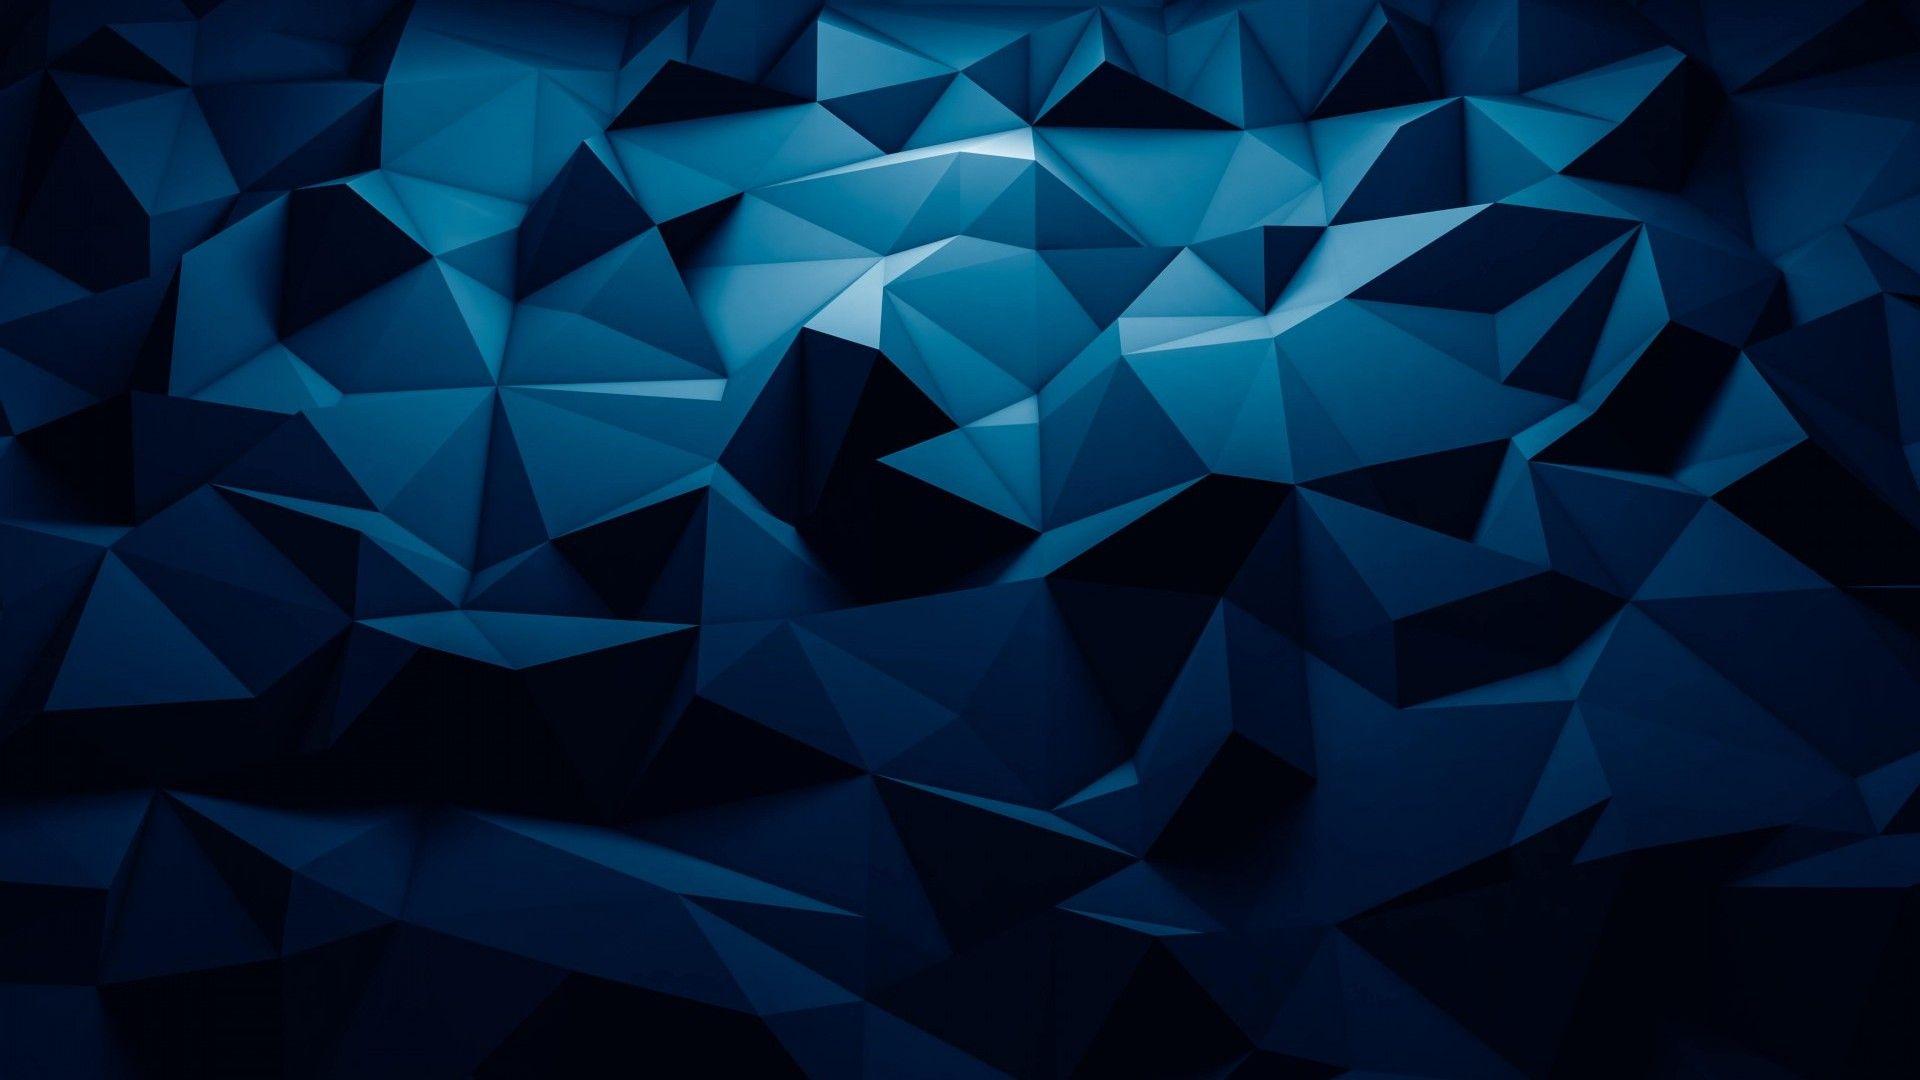 The Next Polylog 3D Top Wallpaper With Blue One Color